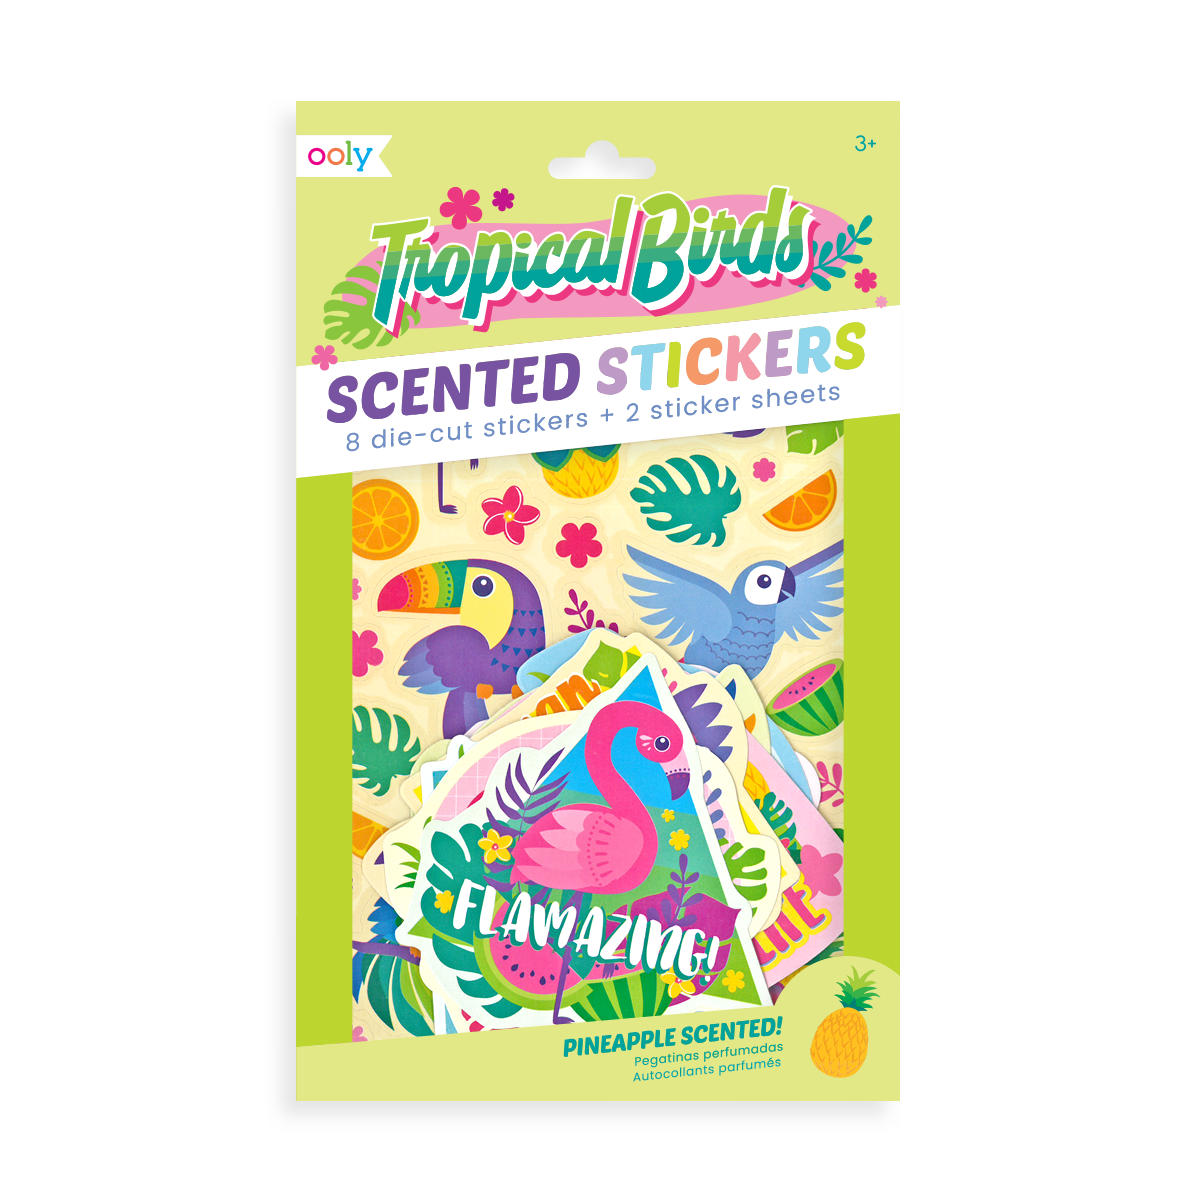 Tropical Birds Scented Sticker package